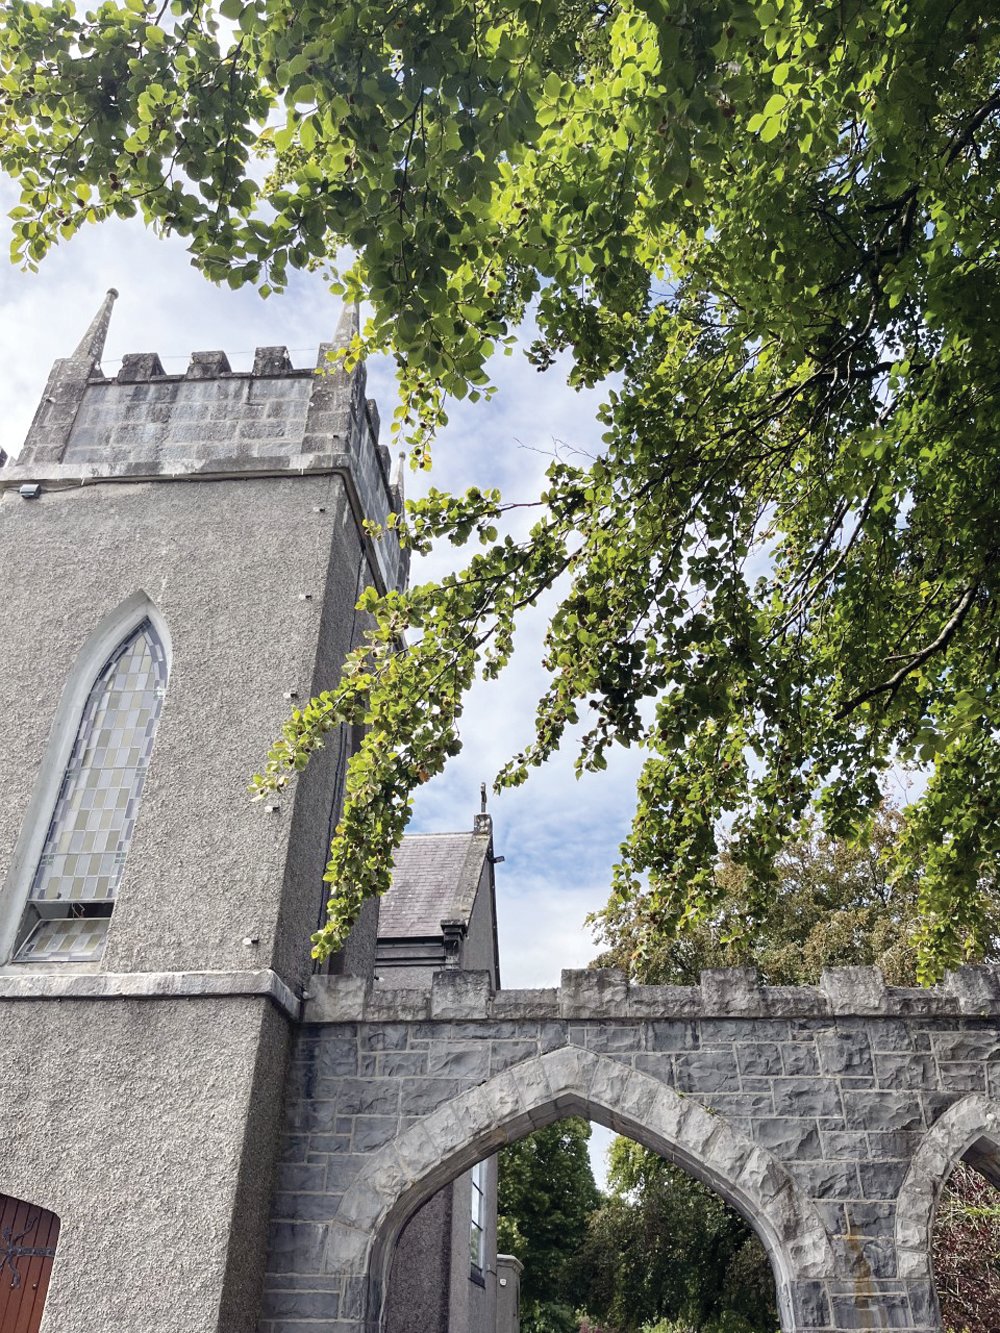 The Church of the Immaculate Conception, the site of Barthly’s baptism, was where he remarried upon his return to Oughterard as a widower. Established in 1829, the church was originally known as St. Mary’s. After a fire destroyed the original building in 1879, the church was rebuilt between 1932 and 1934.